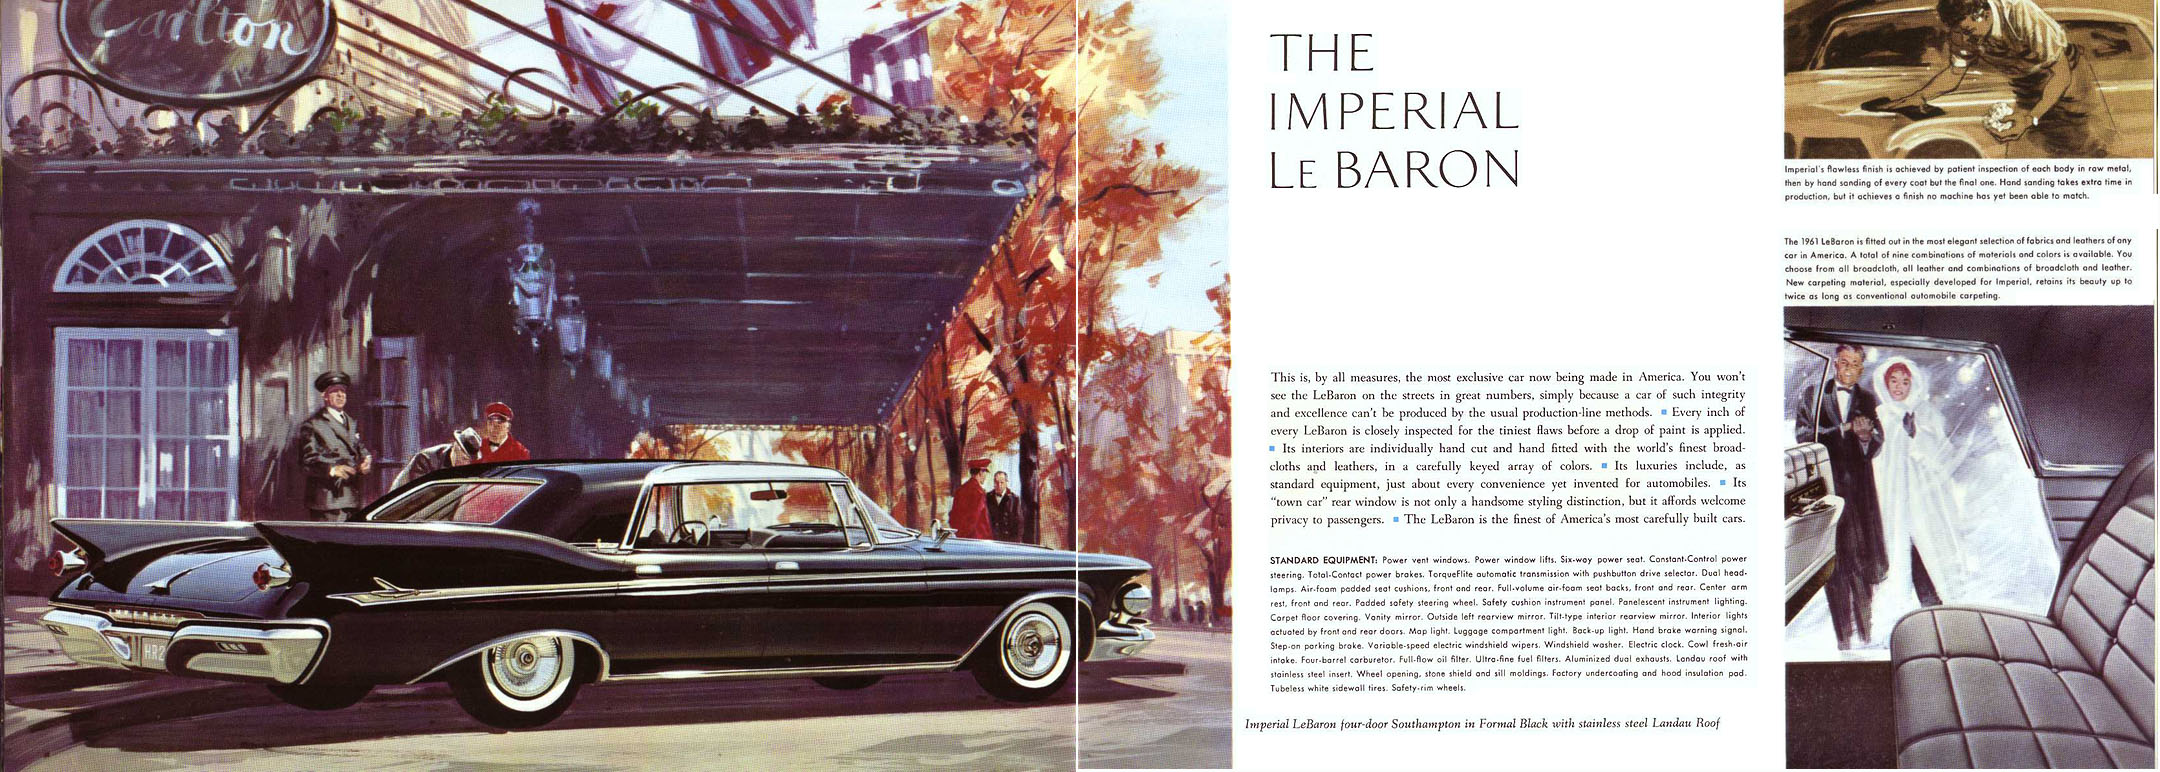 1961 Chrysler Imperial Brochure Page 5